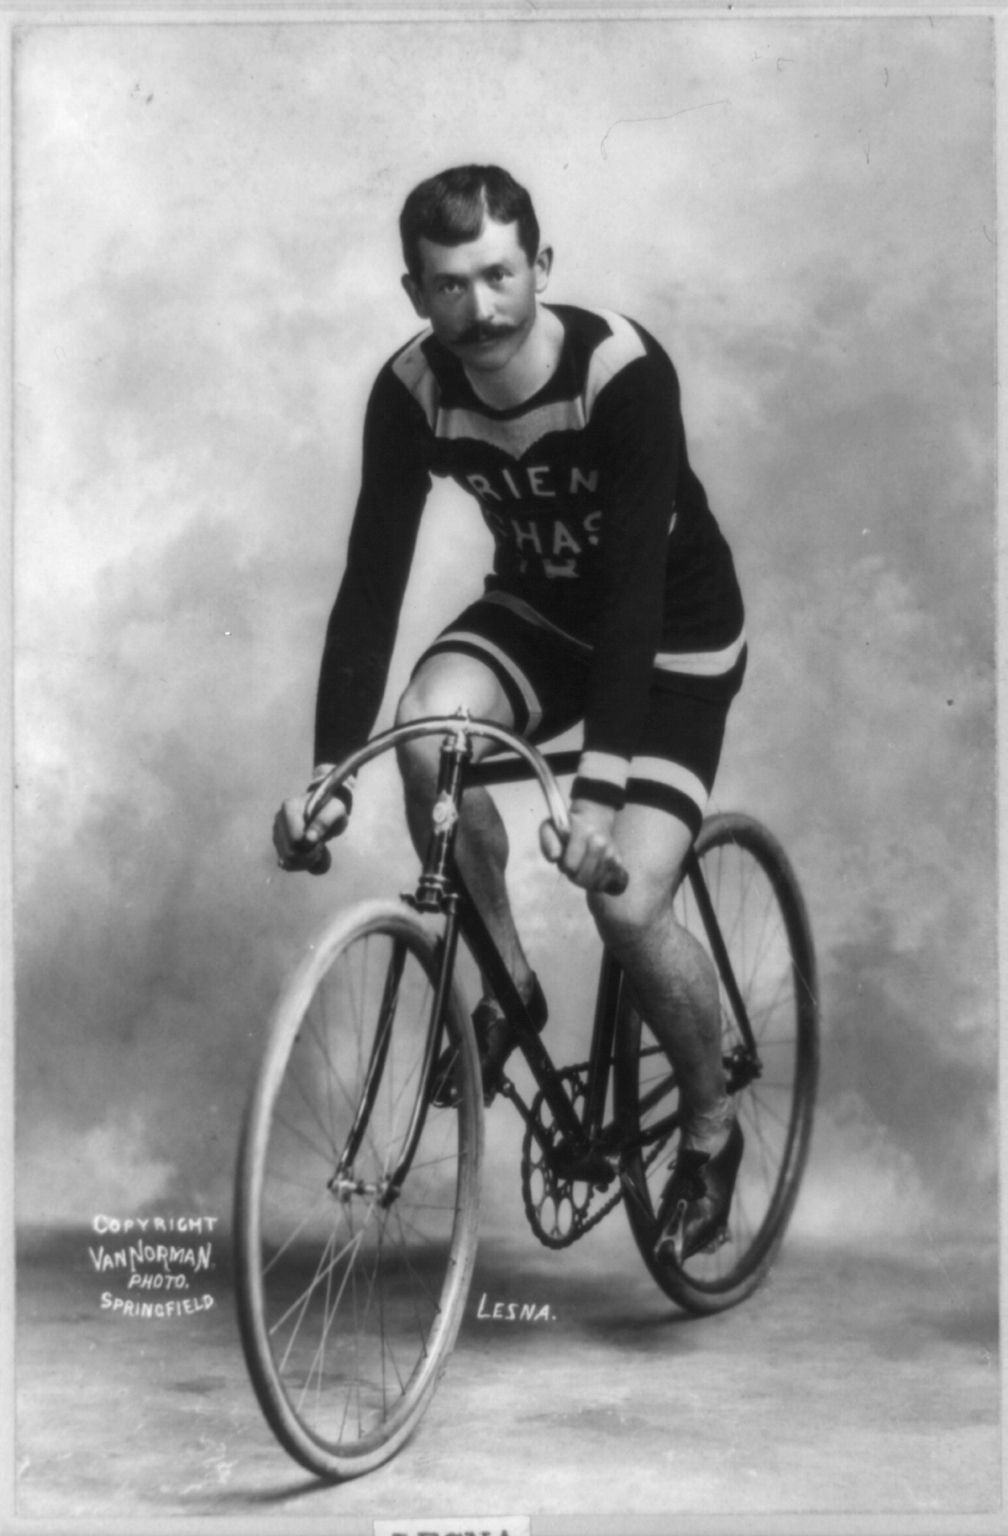 an old black and white po of a man riding a bicycle